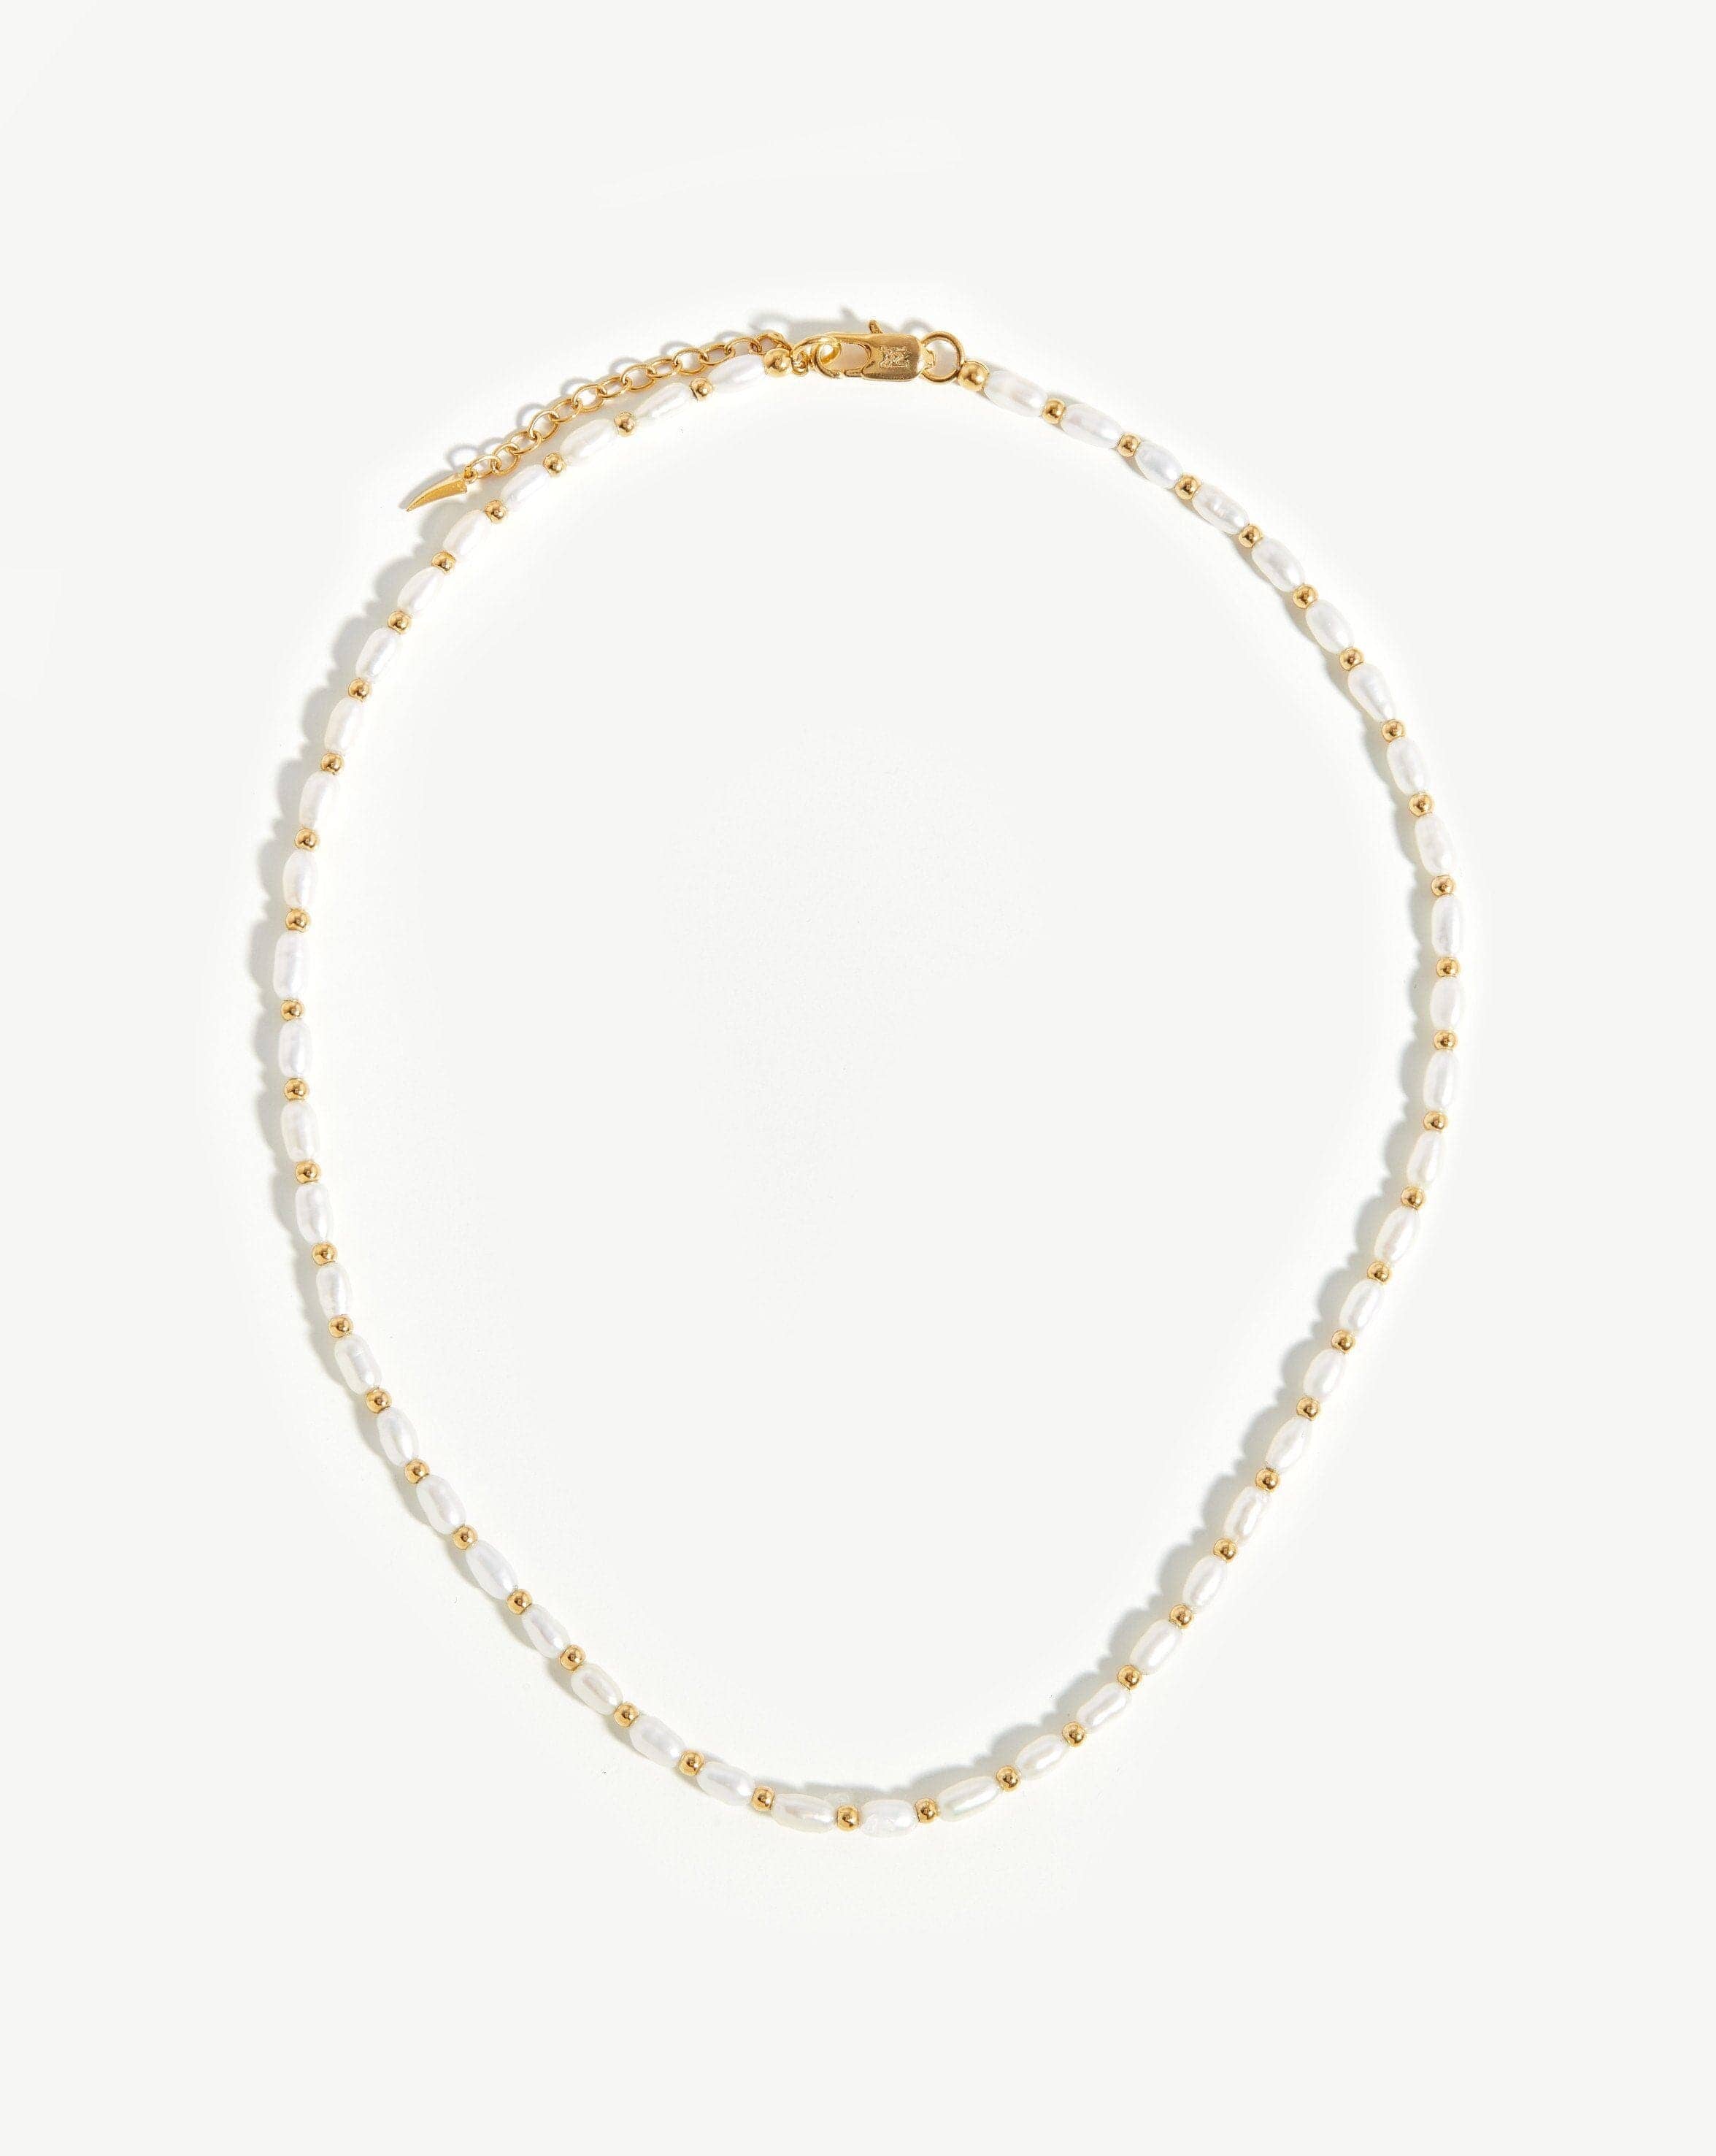 Seed Pearl Beaded Choker Necklaces Missoma 18ct Gold Plated/Pearl 